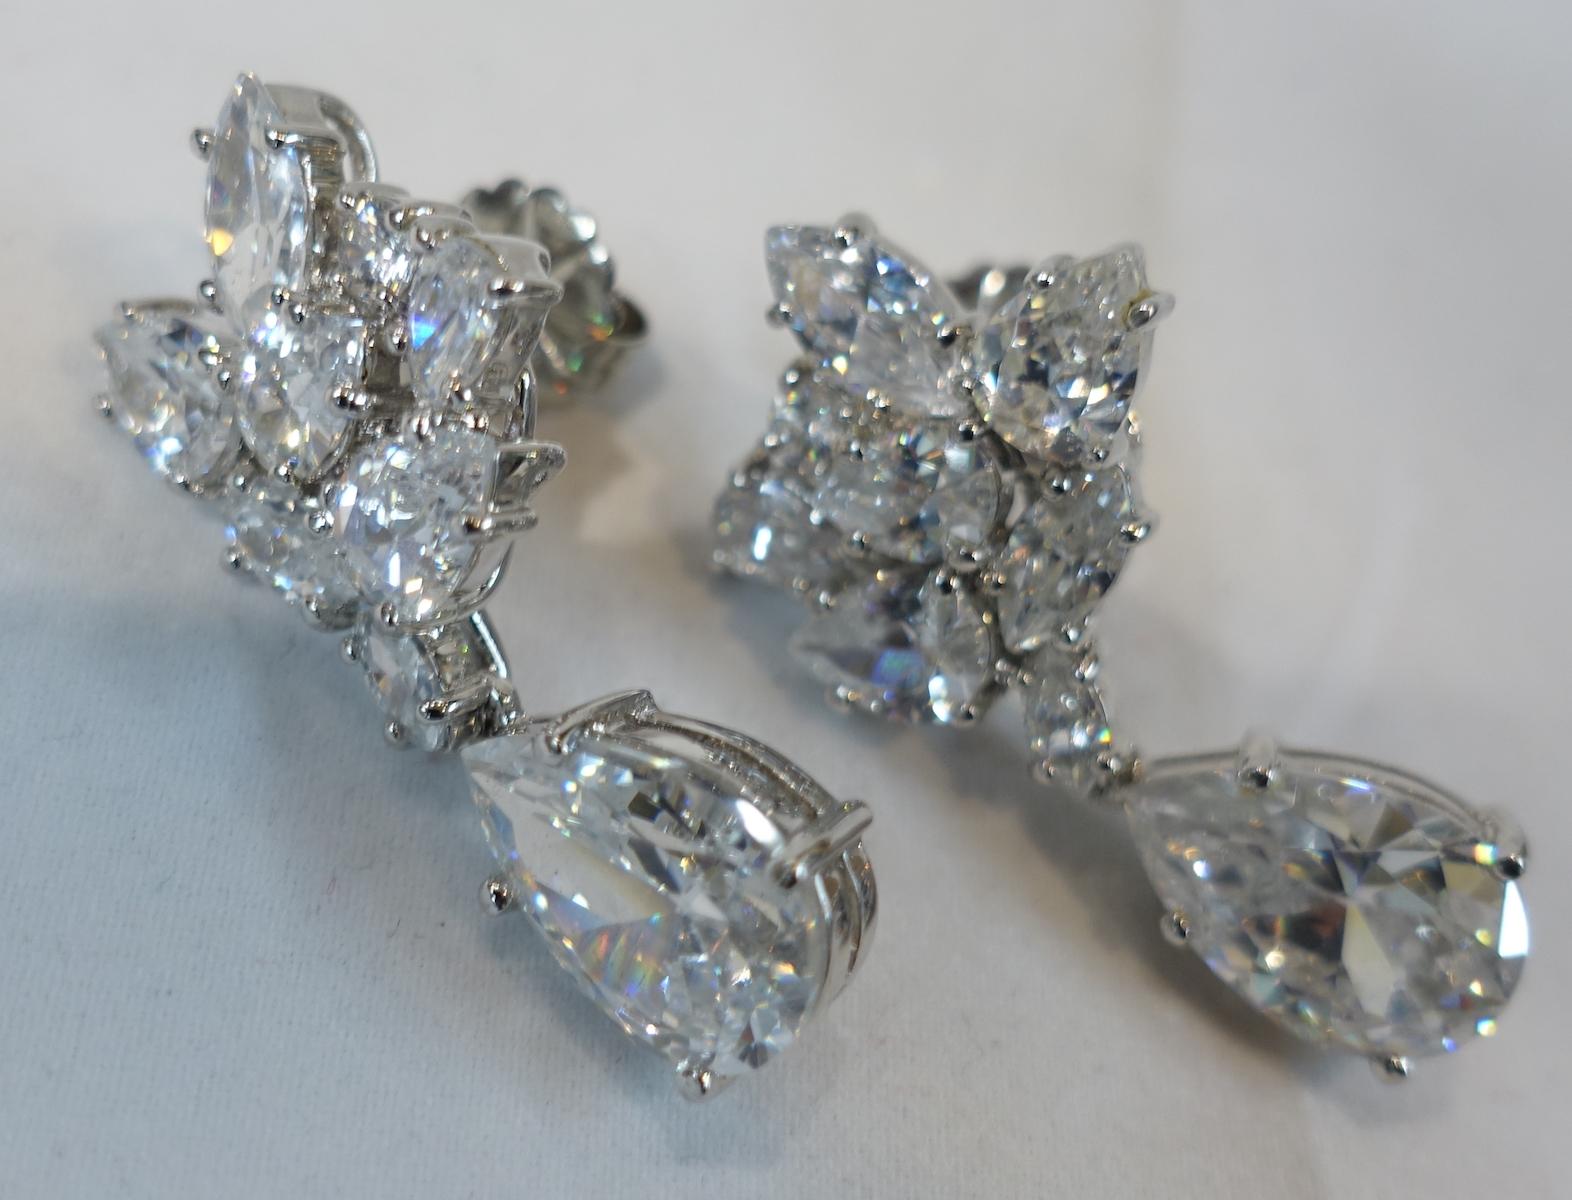 These vintage earrings have a crystal floral top with a clear crystal drop … in a sterling silver setting.  In excellent condition, these sterling silver pierced earrings measure 1-1/2” x 3/4”.